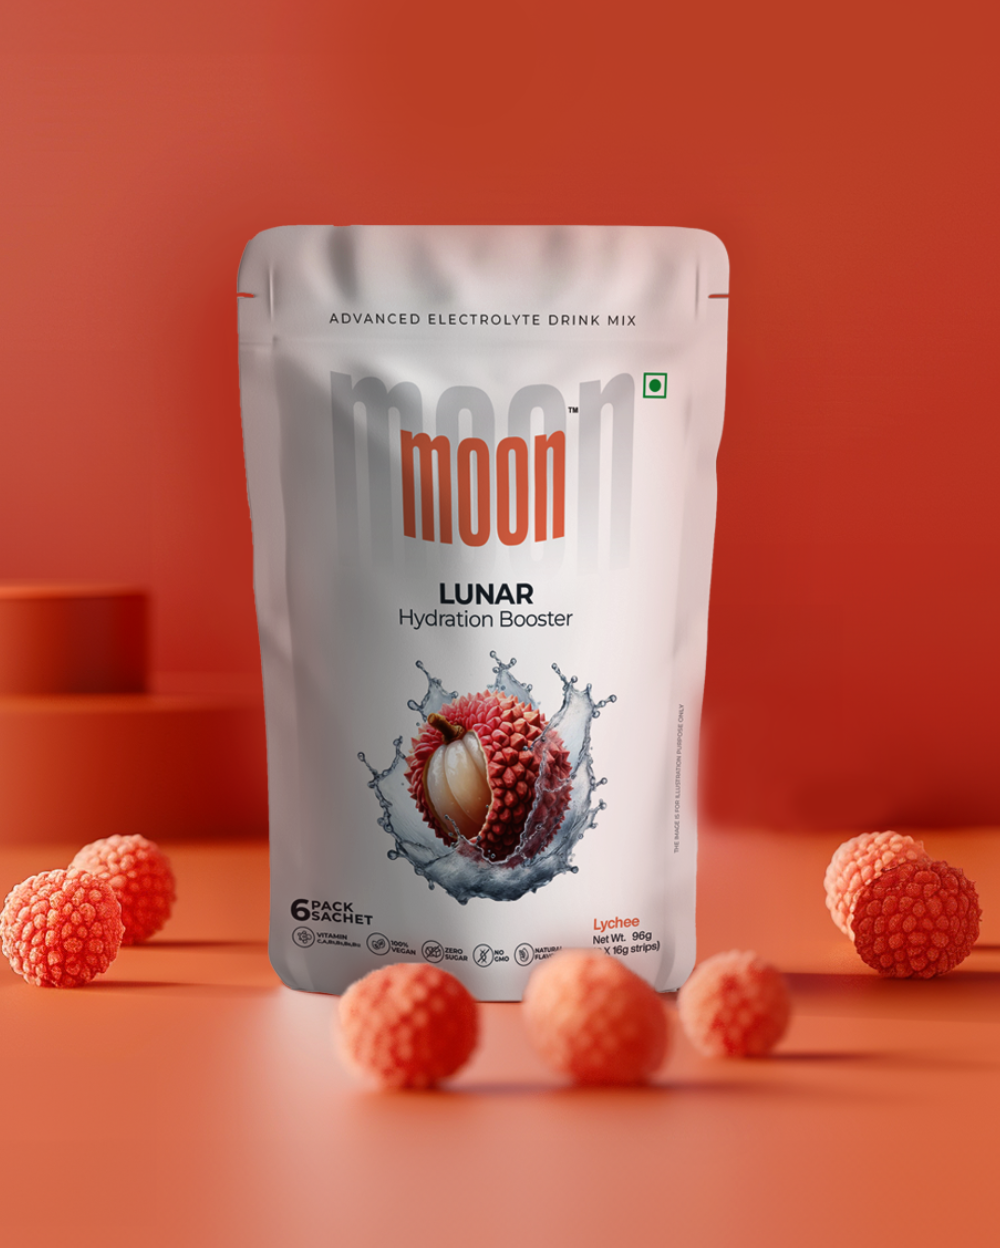 A bag of Moon Lychee Lunar Hydration Booster by MOONFREEZE FOODS PRIVATE LIMITED on a red background with waterproof capabilities.